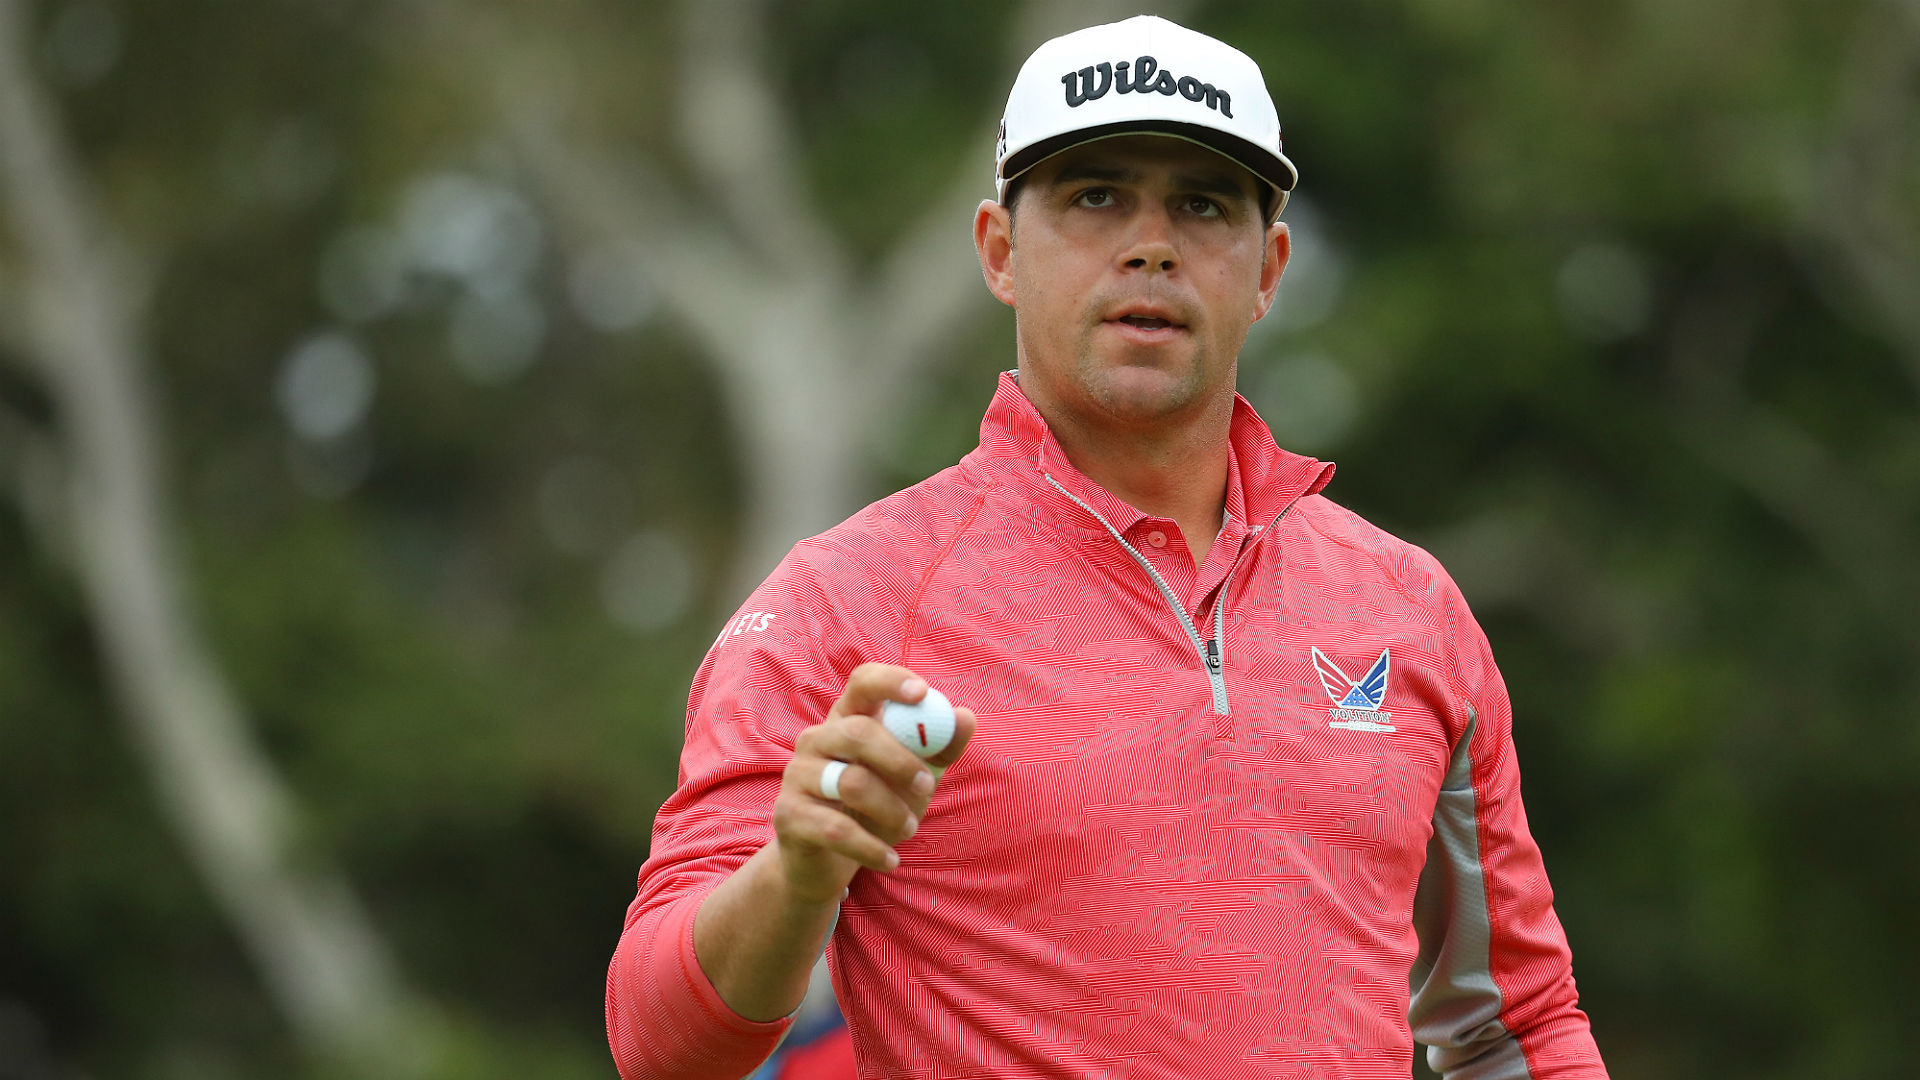 U.S. Open 2019: Gary Woodland holds on for win | Sporting News Canada1920 x 1080